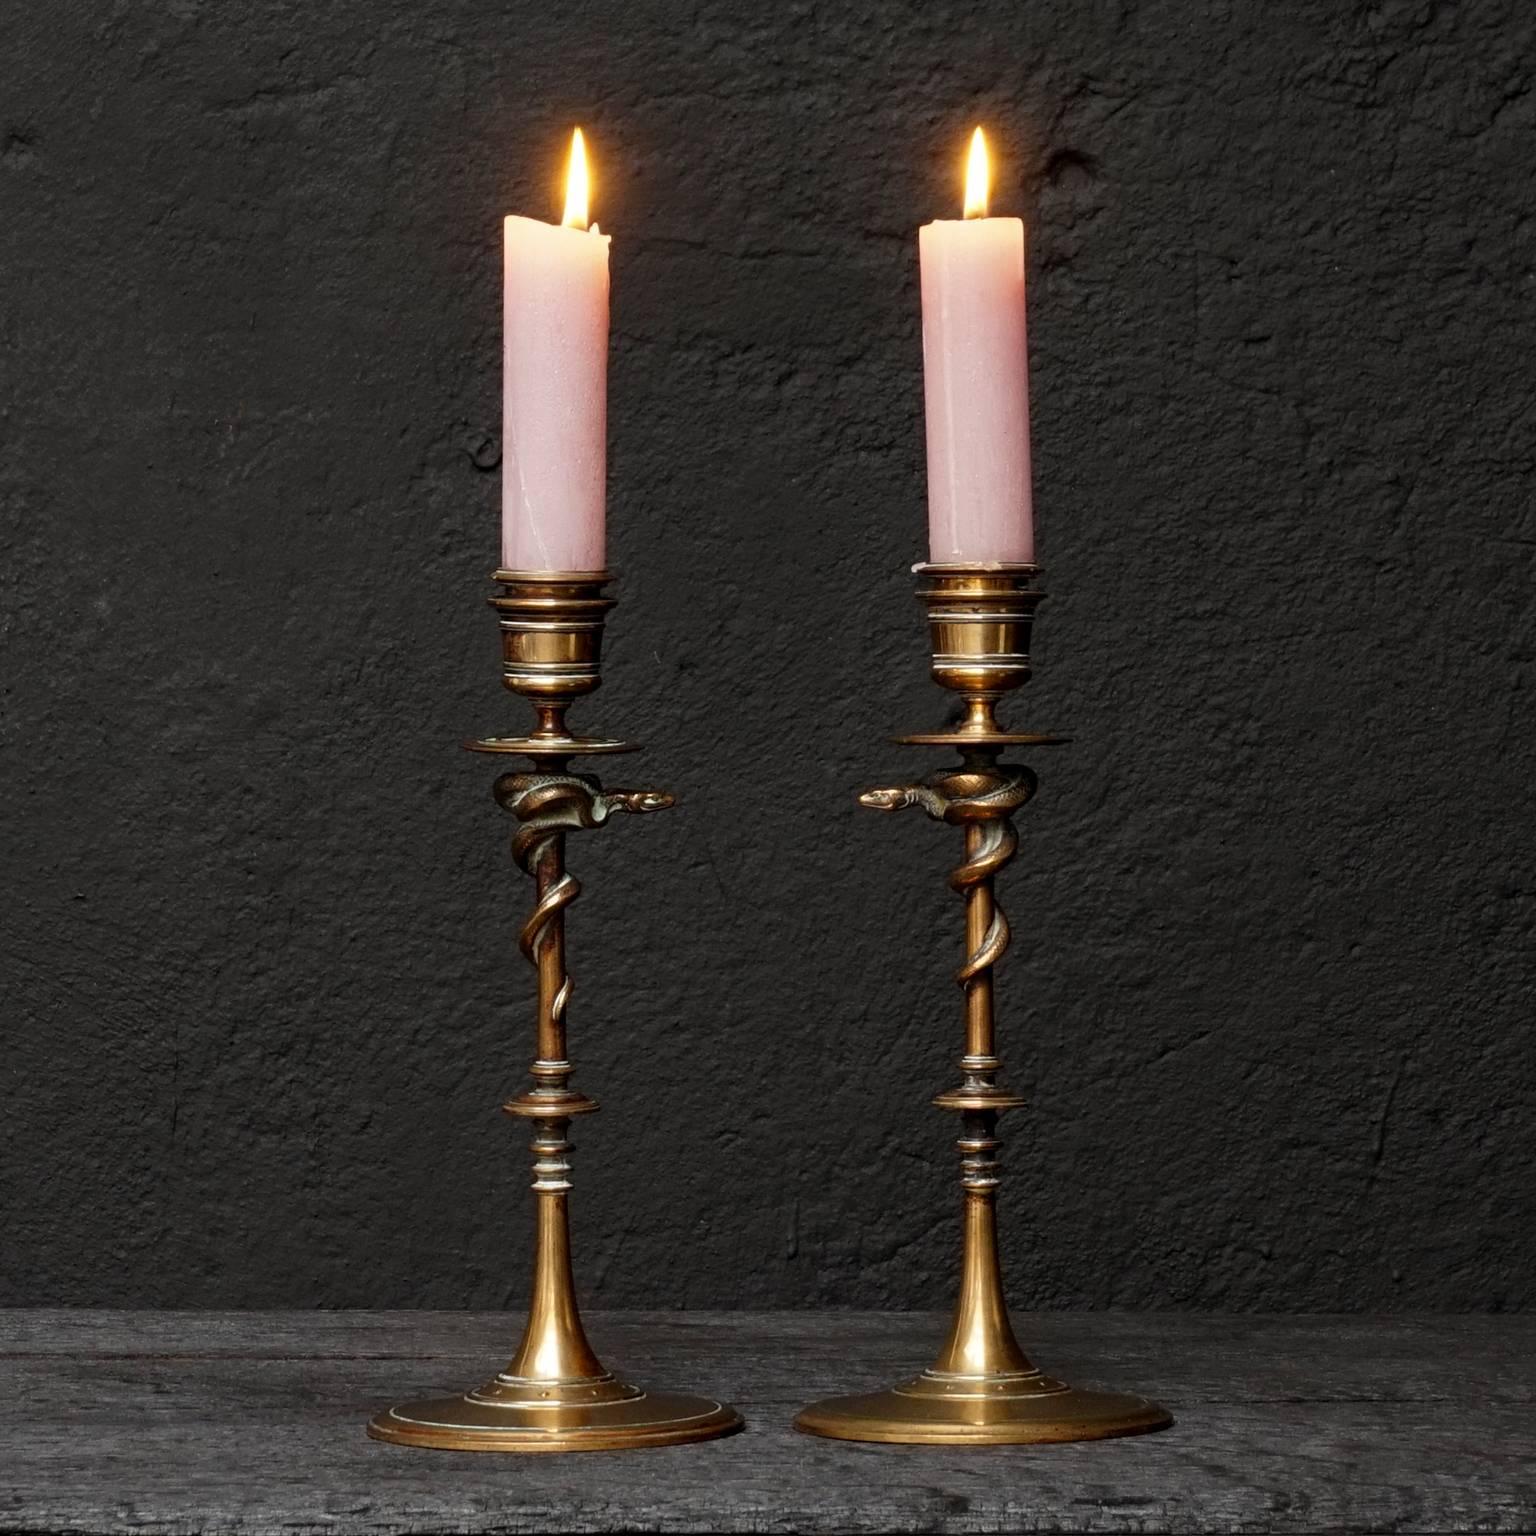 A pair of bronze candlesticks resting on a circular moulded base adorned with snakes crawling upwards.
Marked F. Barbedienne on the base. Numbered 46244 underneath and signed.

Ferdinand Barbedienne (1810-1892) was a renowned French metalworker